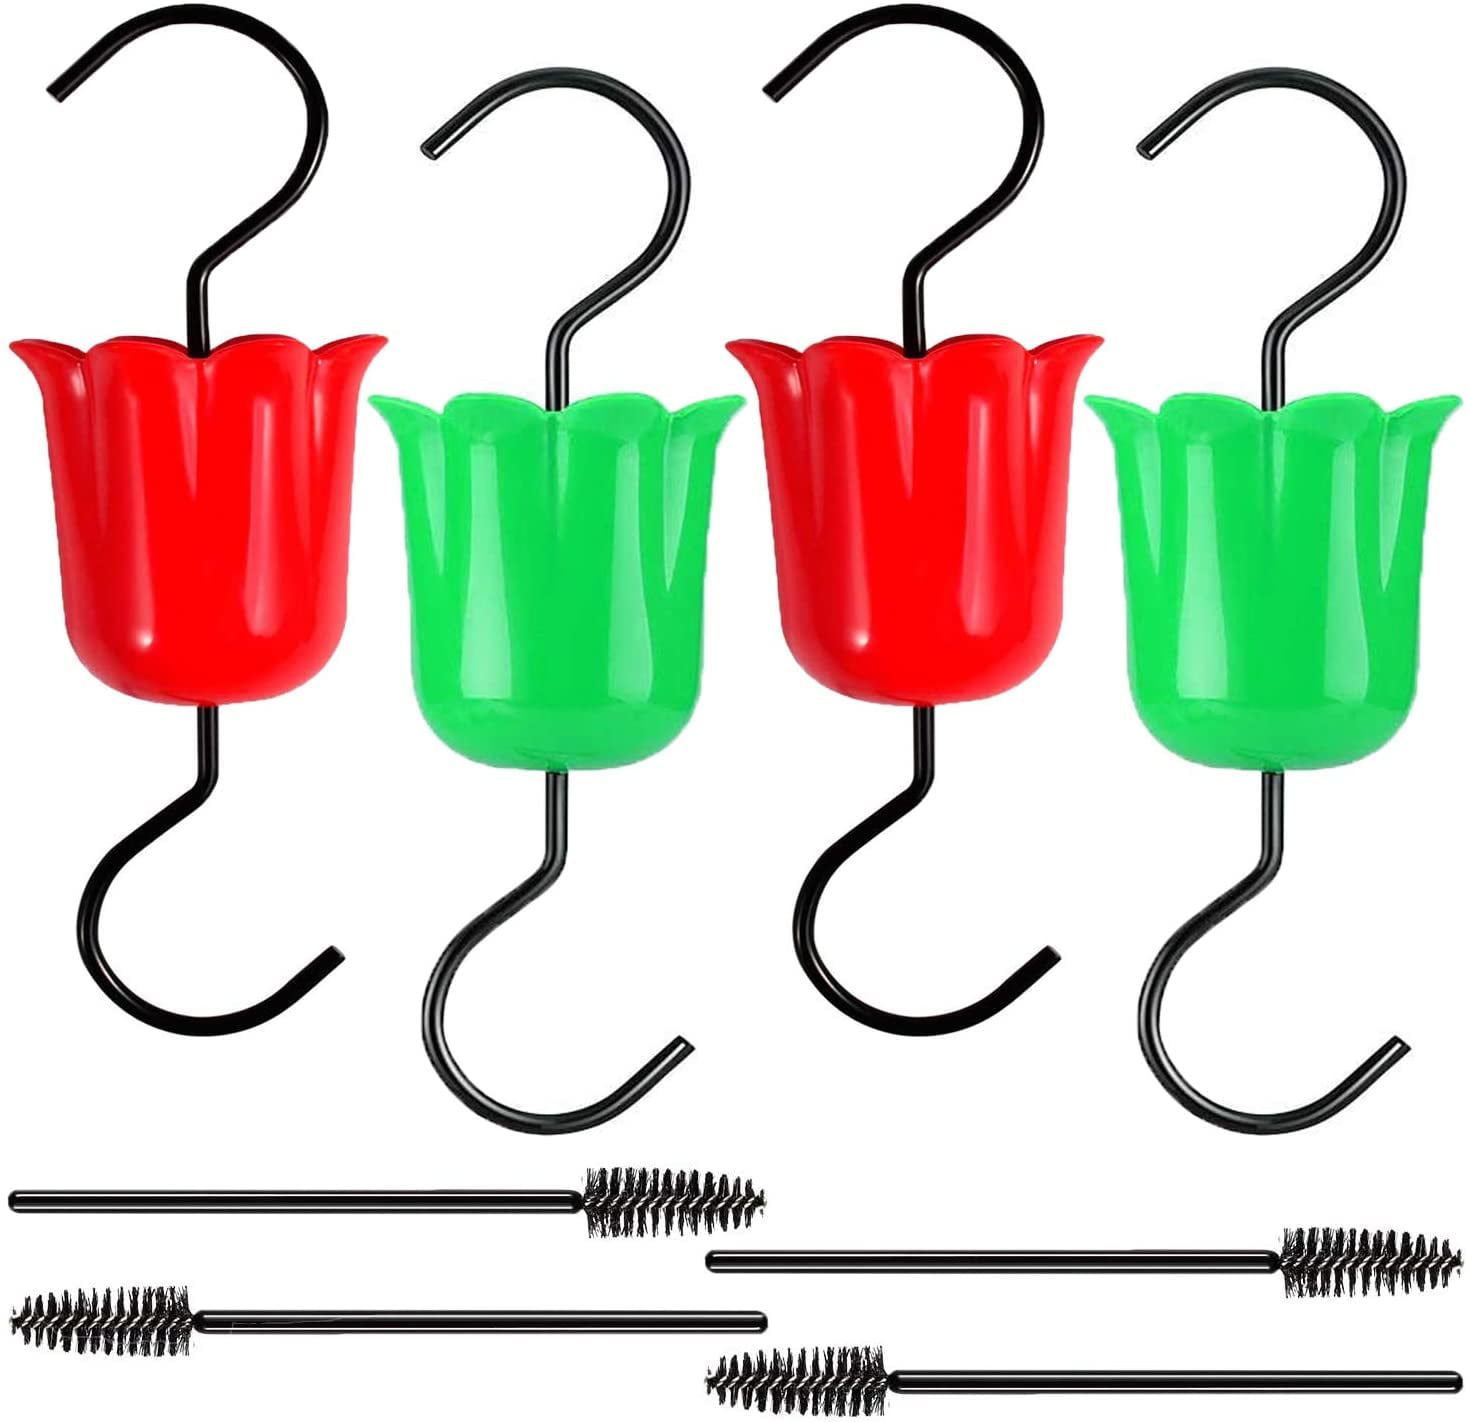 4 Hook + 4 Brush Green Hummingbird Feeder Ant Guard Gets Rid of Ants Fast in Nectar 100% Safe Hummingbird Feeders Accessory Outdoor Tree Hooks 4Pack Hummingbird Feeder Insect Ant Moat